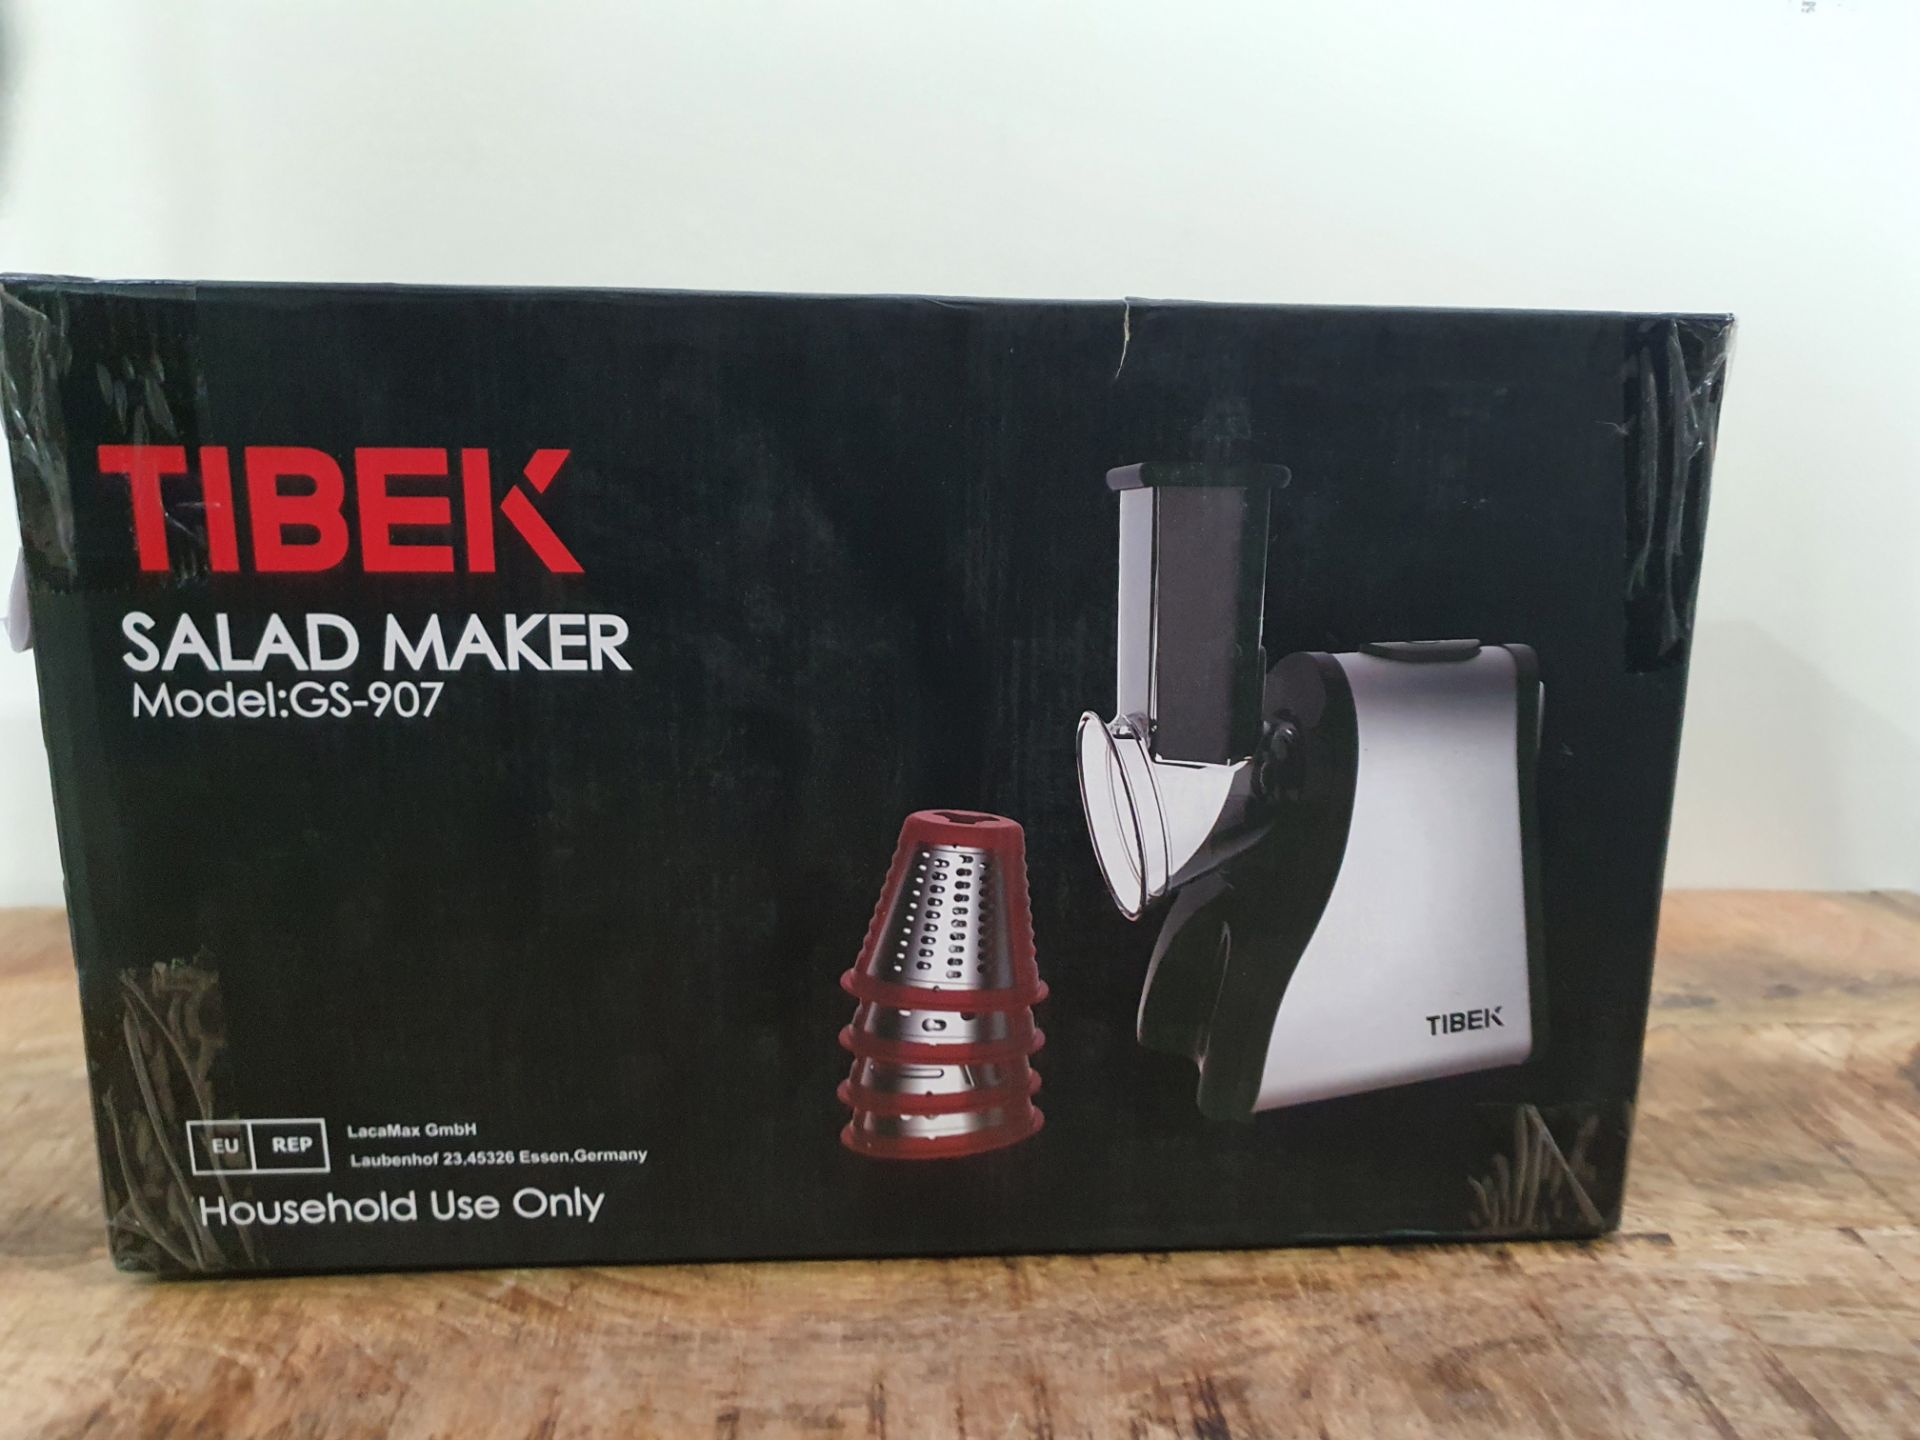 TIBEK SALAD MAKER MODEL GS-907 RRP £39.99Condition ReportAppraisal Available on Request - All